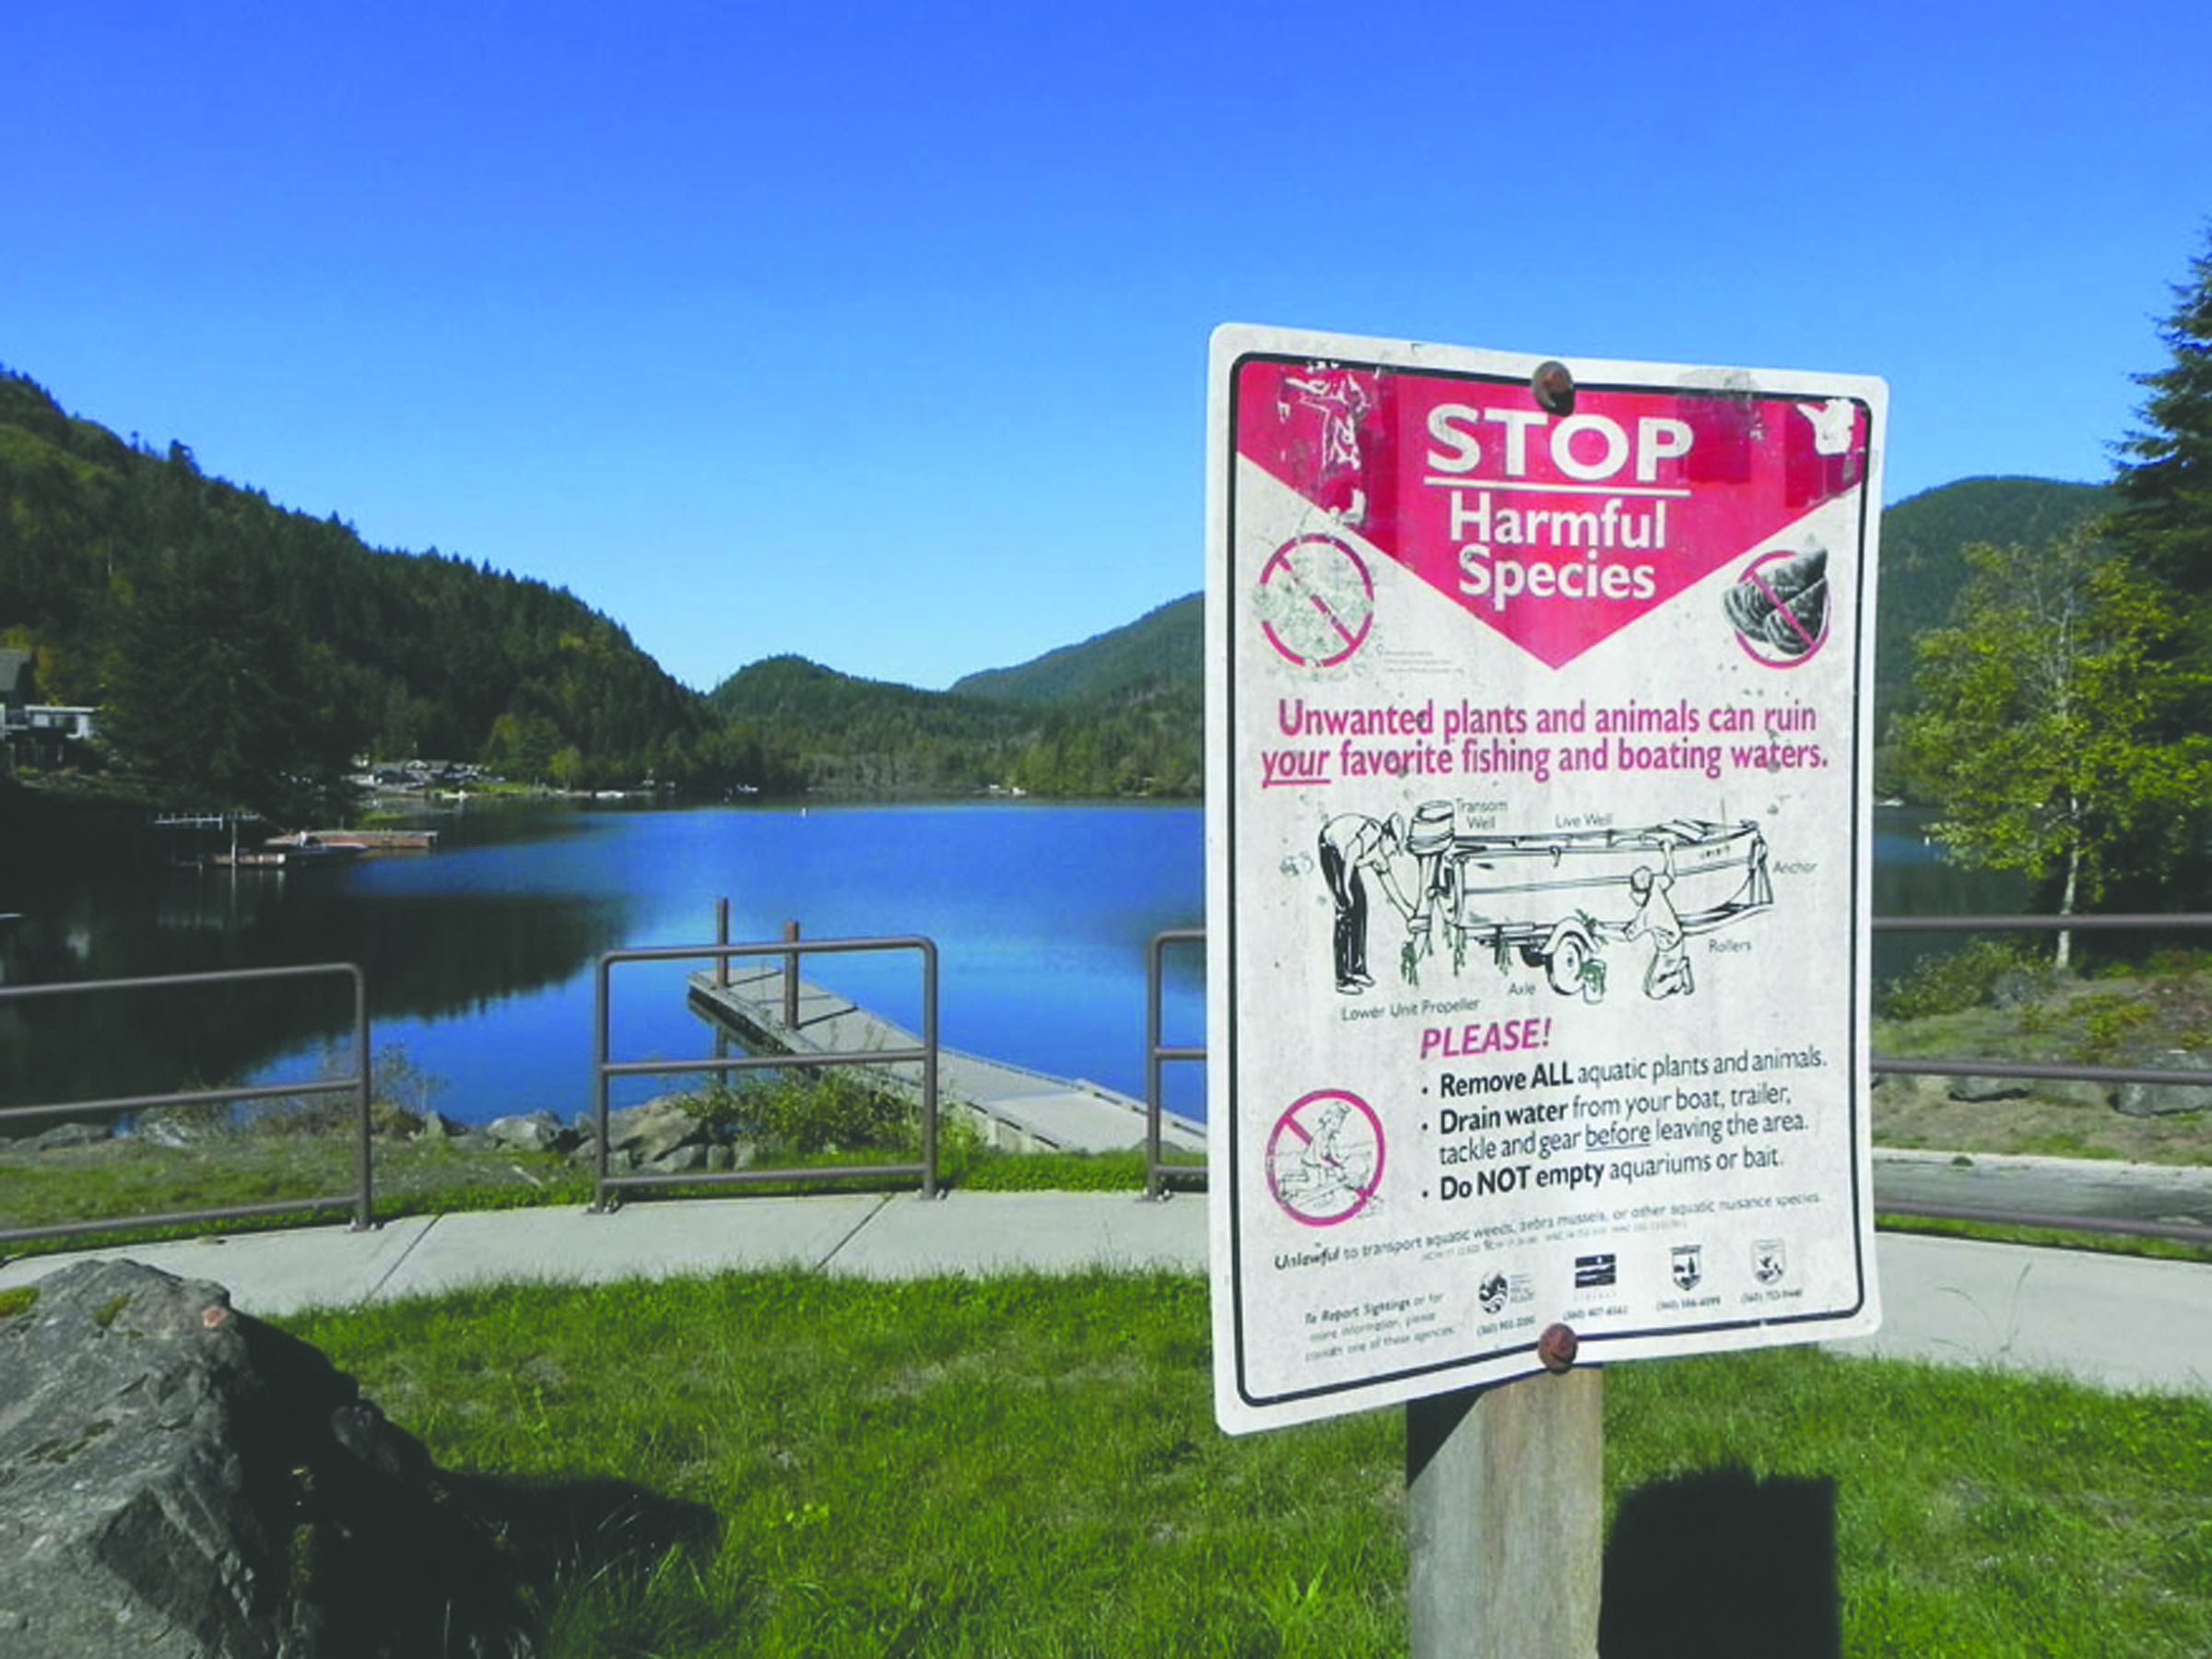 A sign at Lake Sutherland west of Port Angeles instructs boat launch users to guard against introducing non-native species like the bluegill